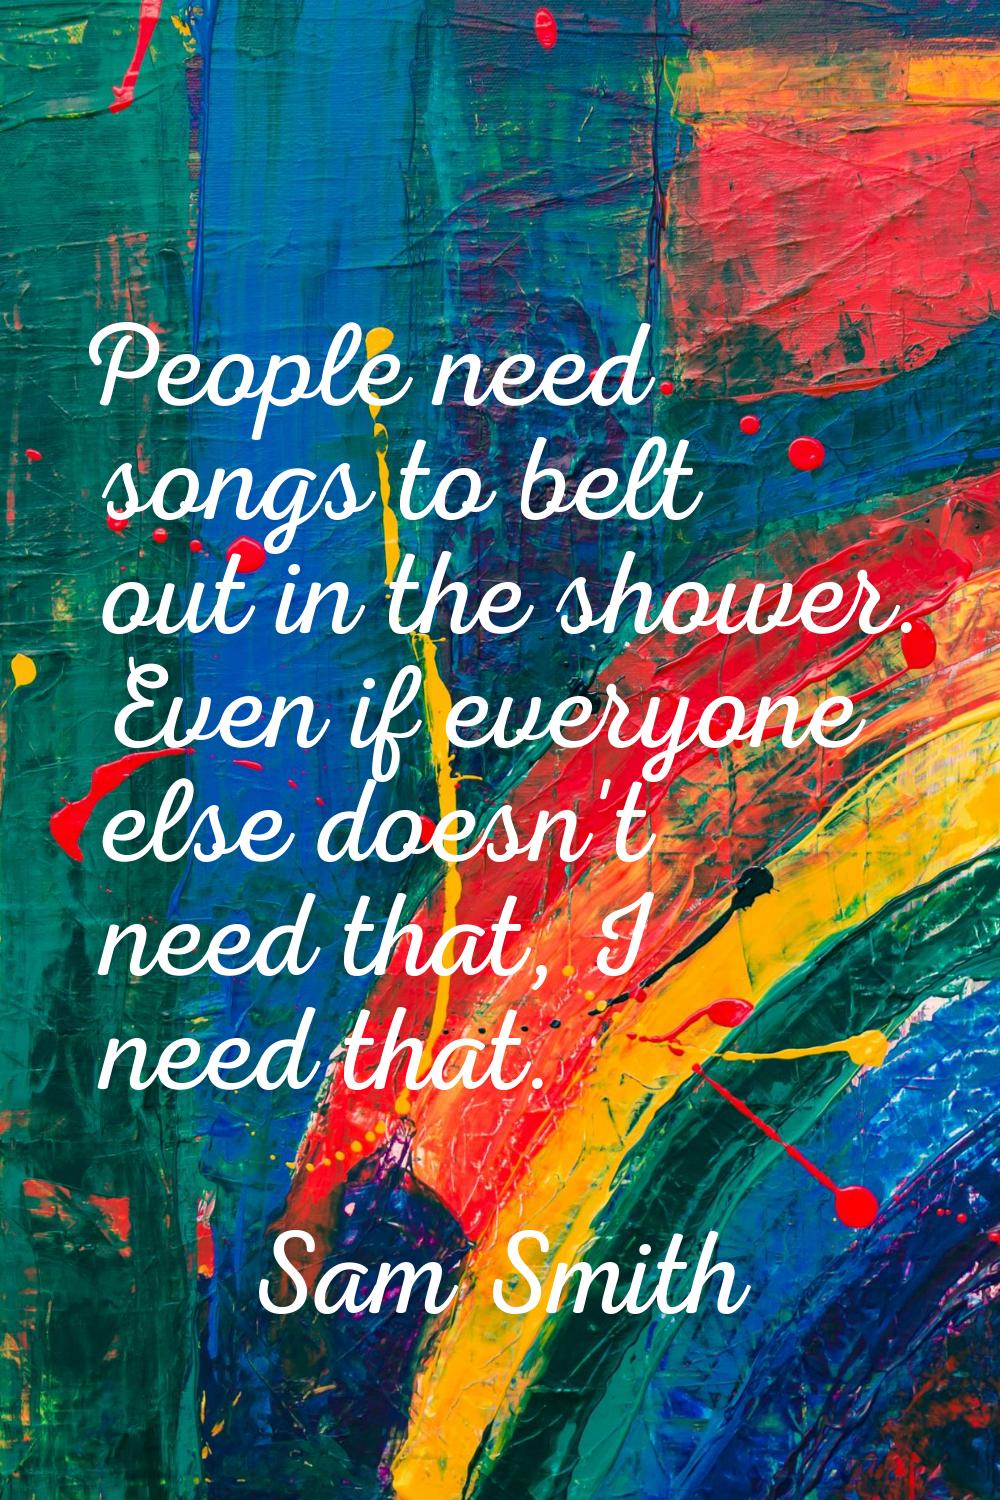 People need songs to belt out in the shower. Even if everyone else doesn't need that, I need that.